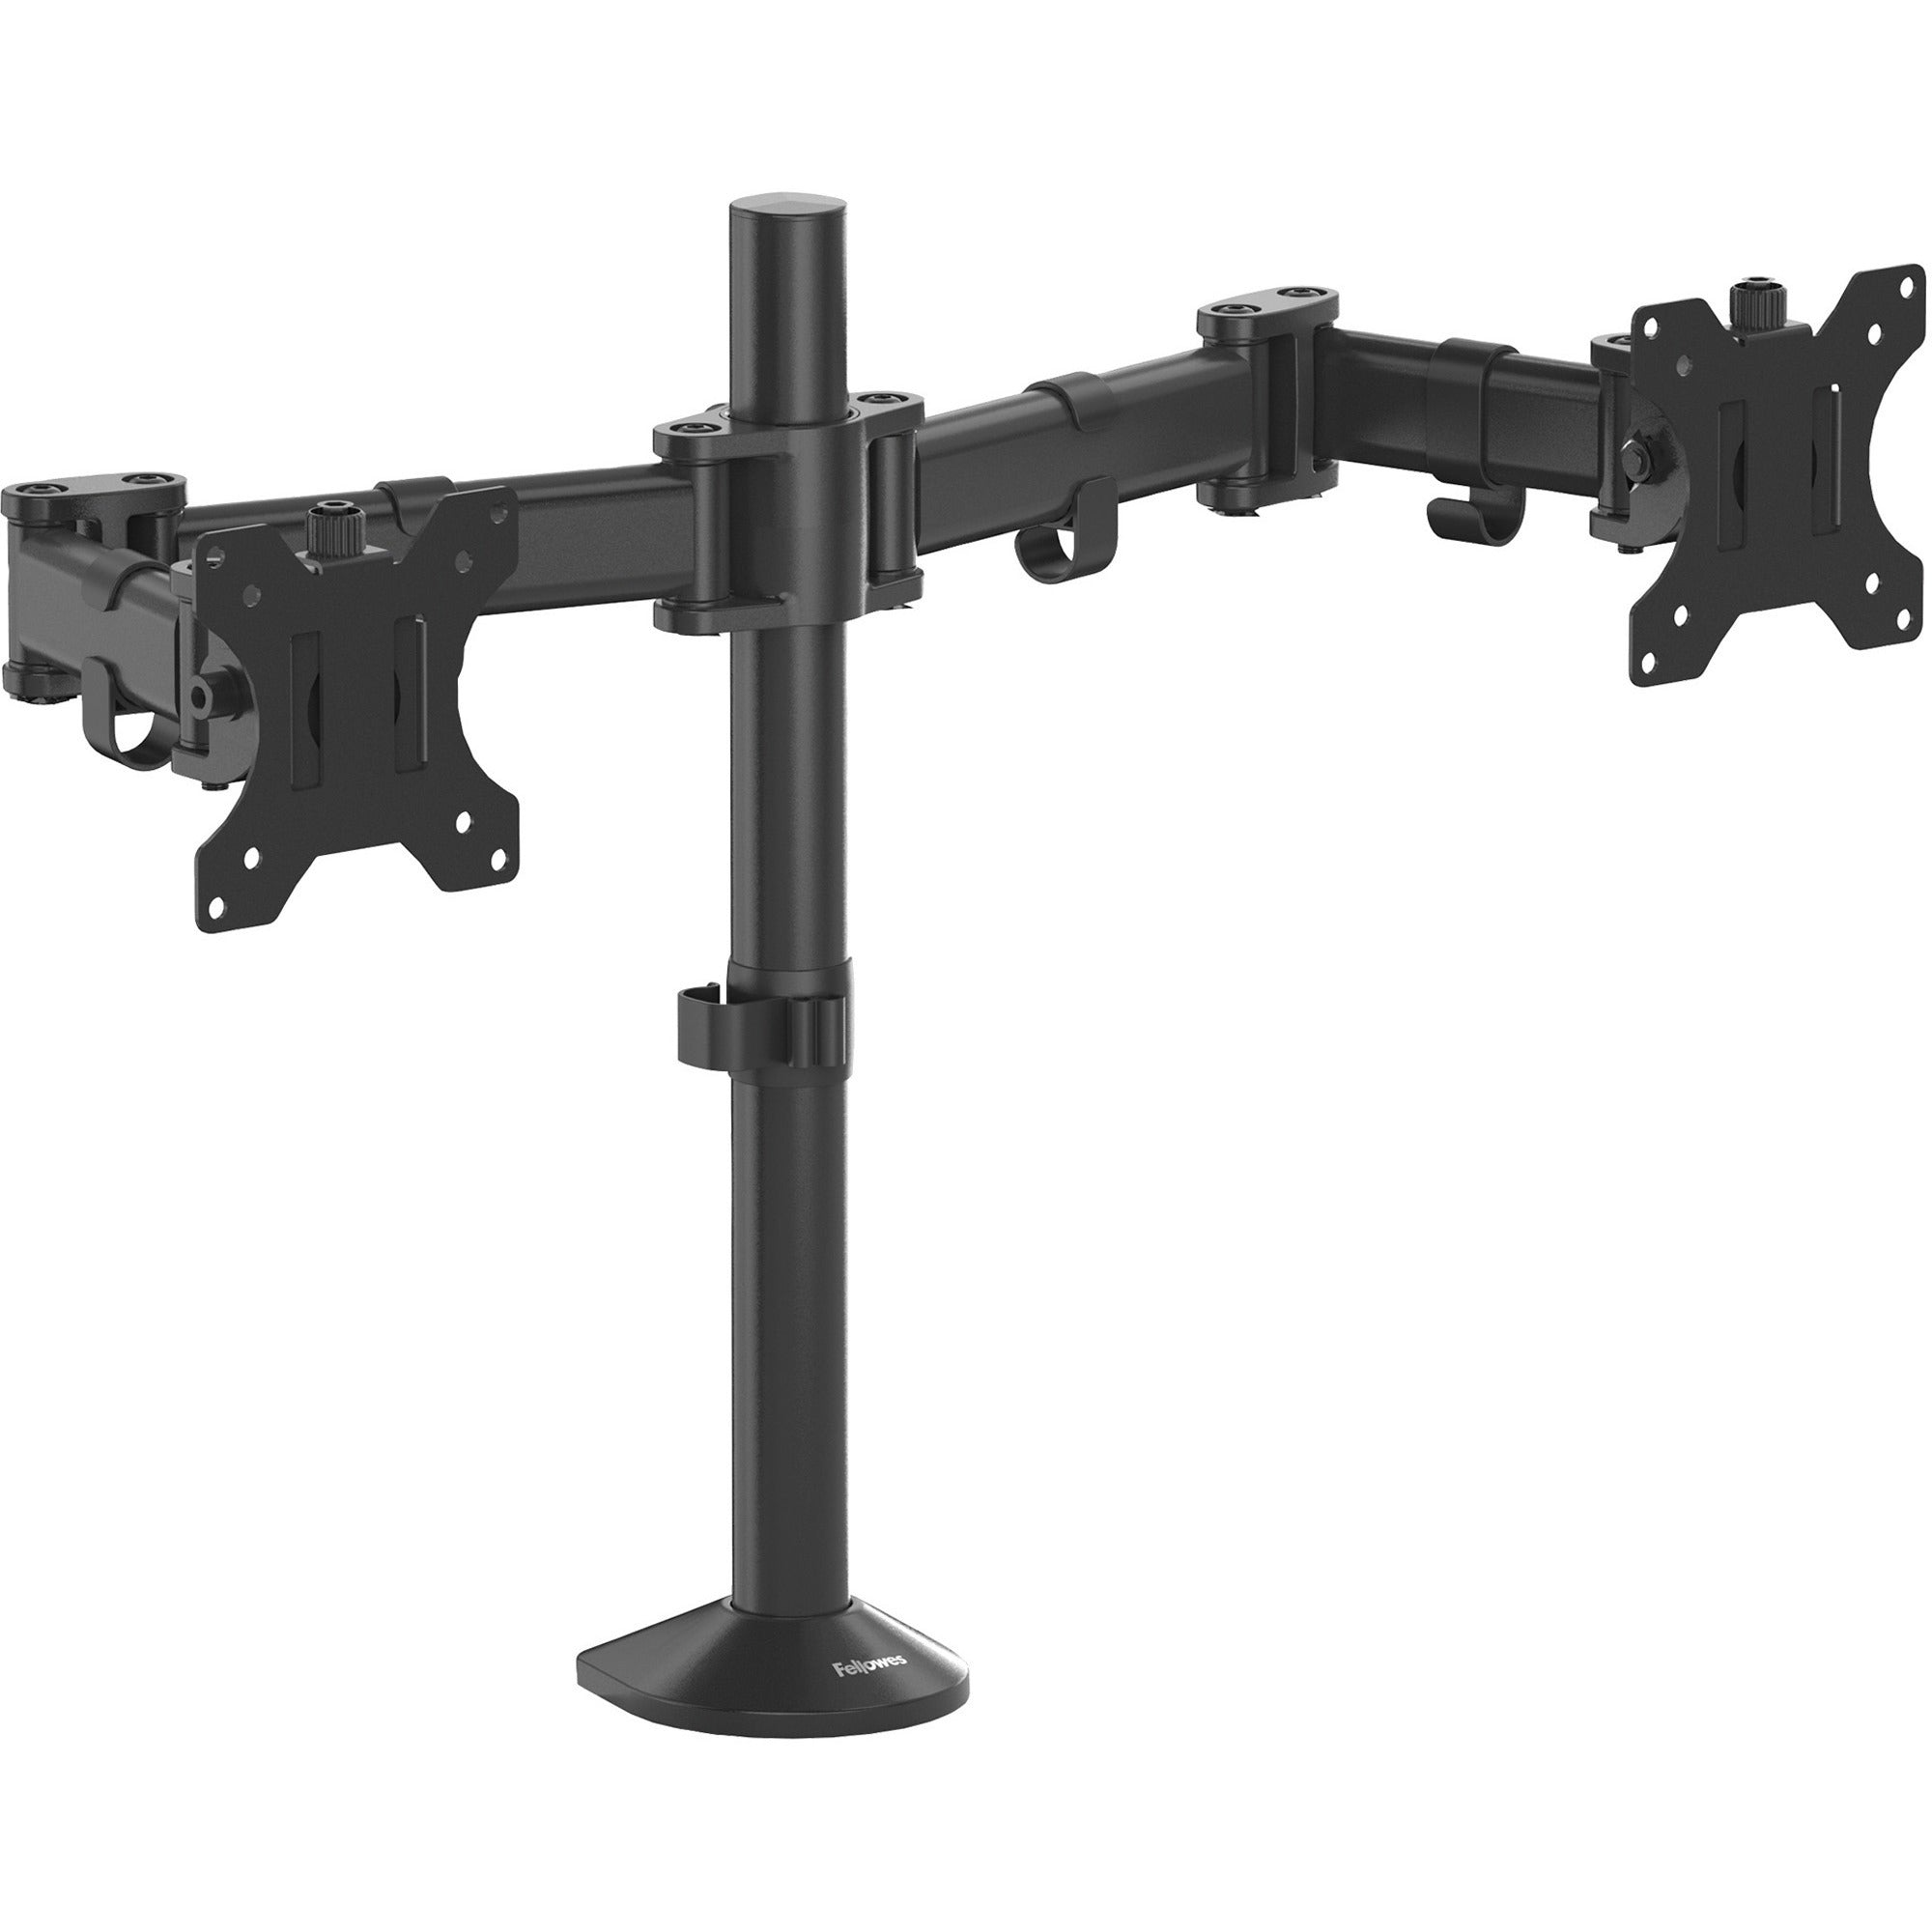 fellowes-reflex-dual-monitor-arm-2-displays-supported-30-screen-support-48-lb-load-capacity_fel8502601 - 5